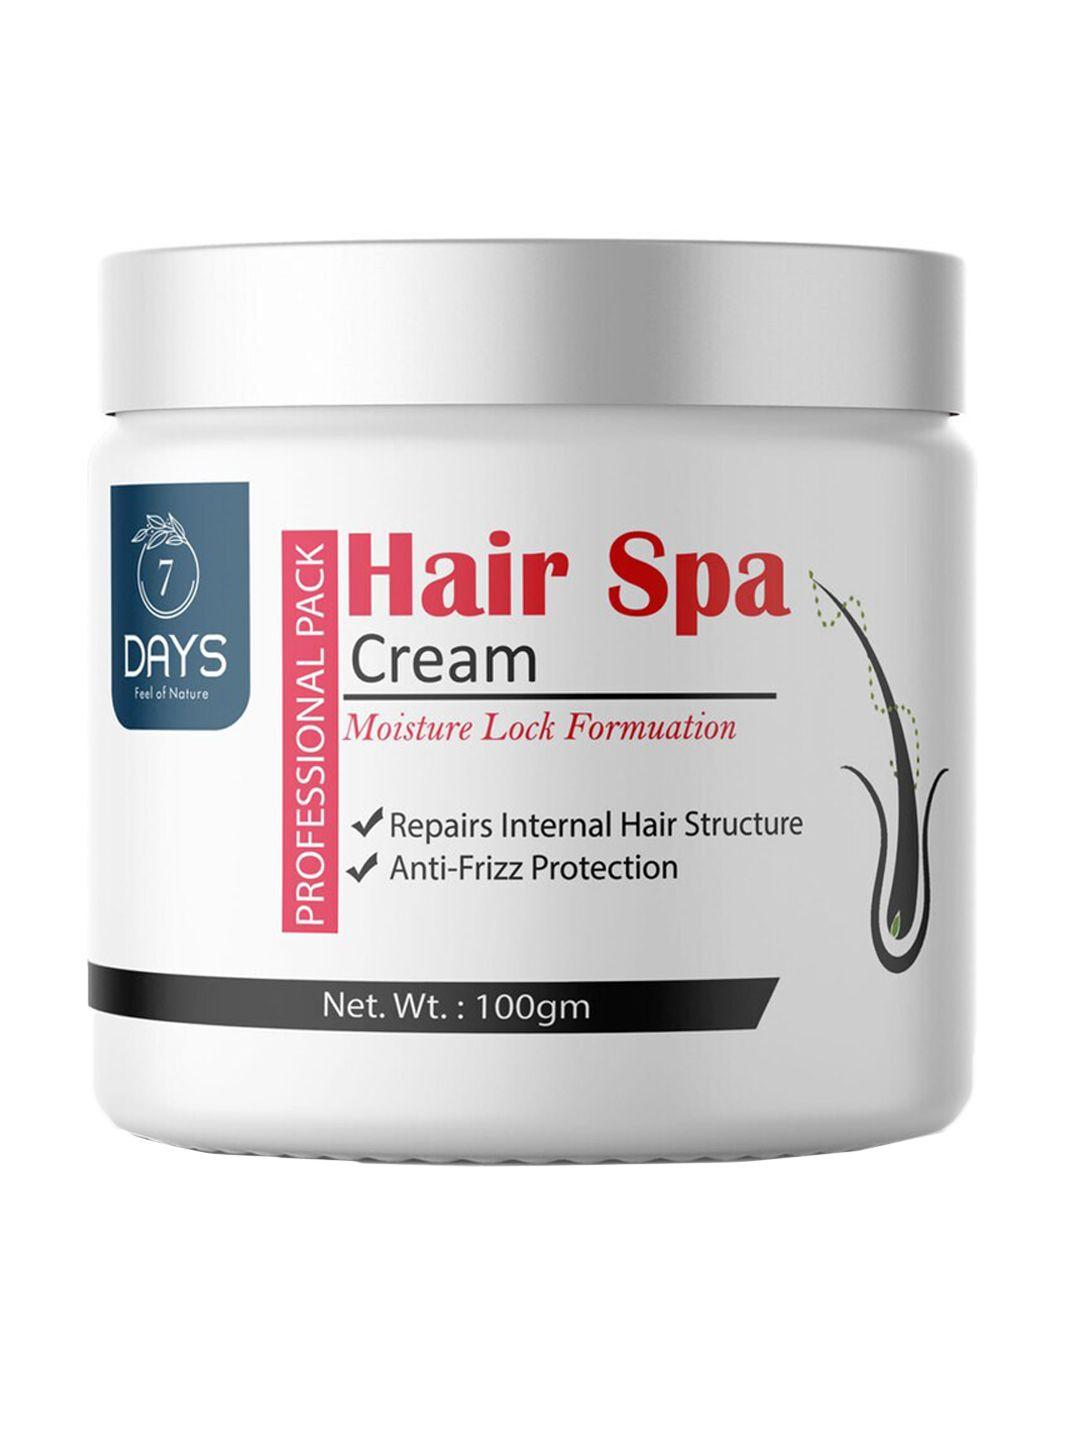 7 days professional hair spa cream for straightened hair dry & frizzy hair - 100g